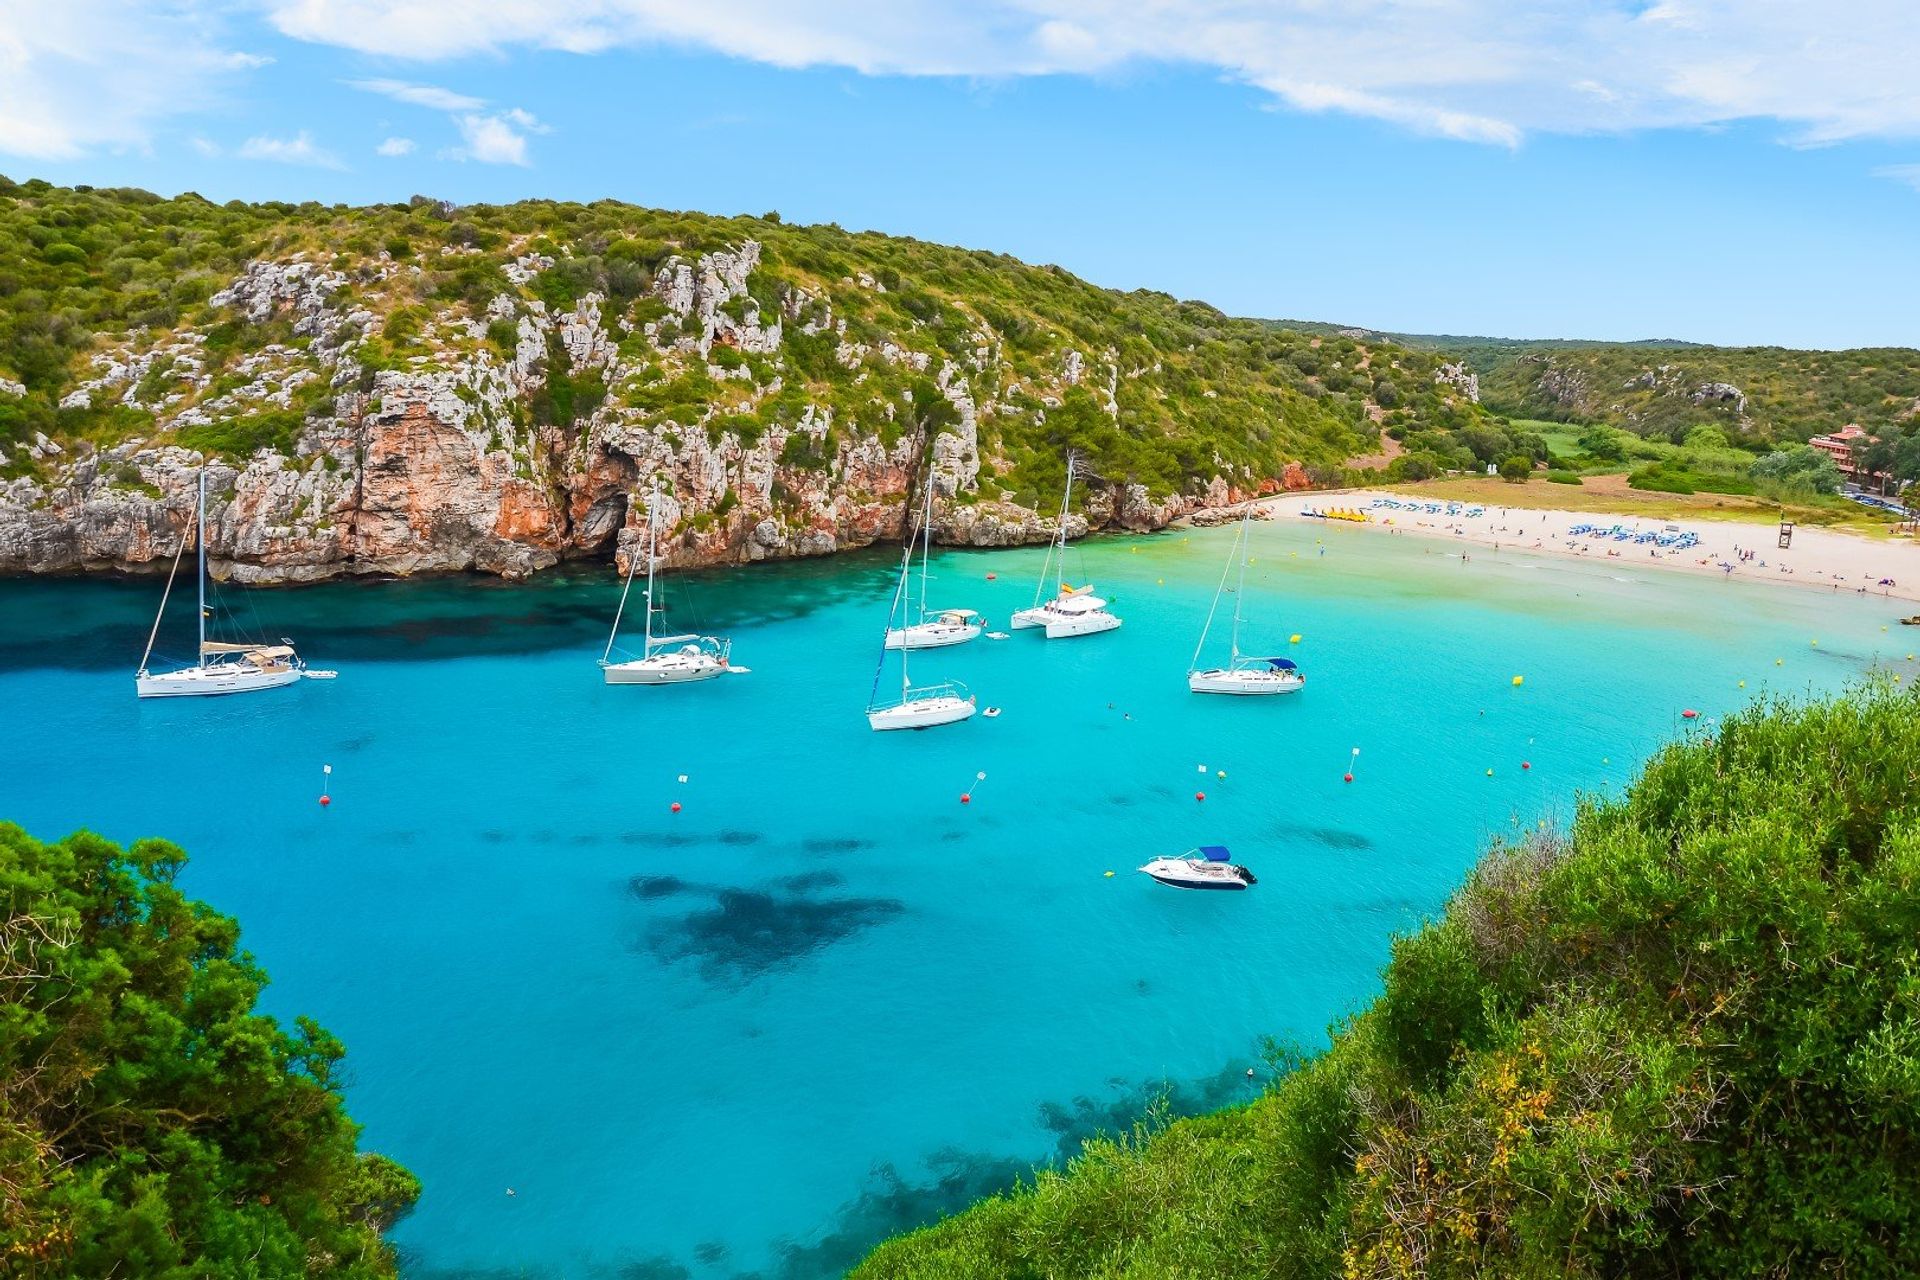 Secluded Cala en Porter cove in Menorca, 7km south of Alaior